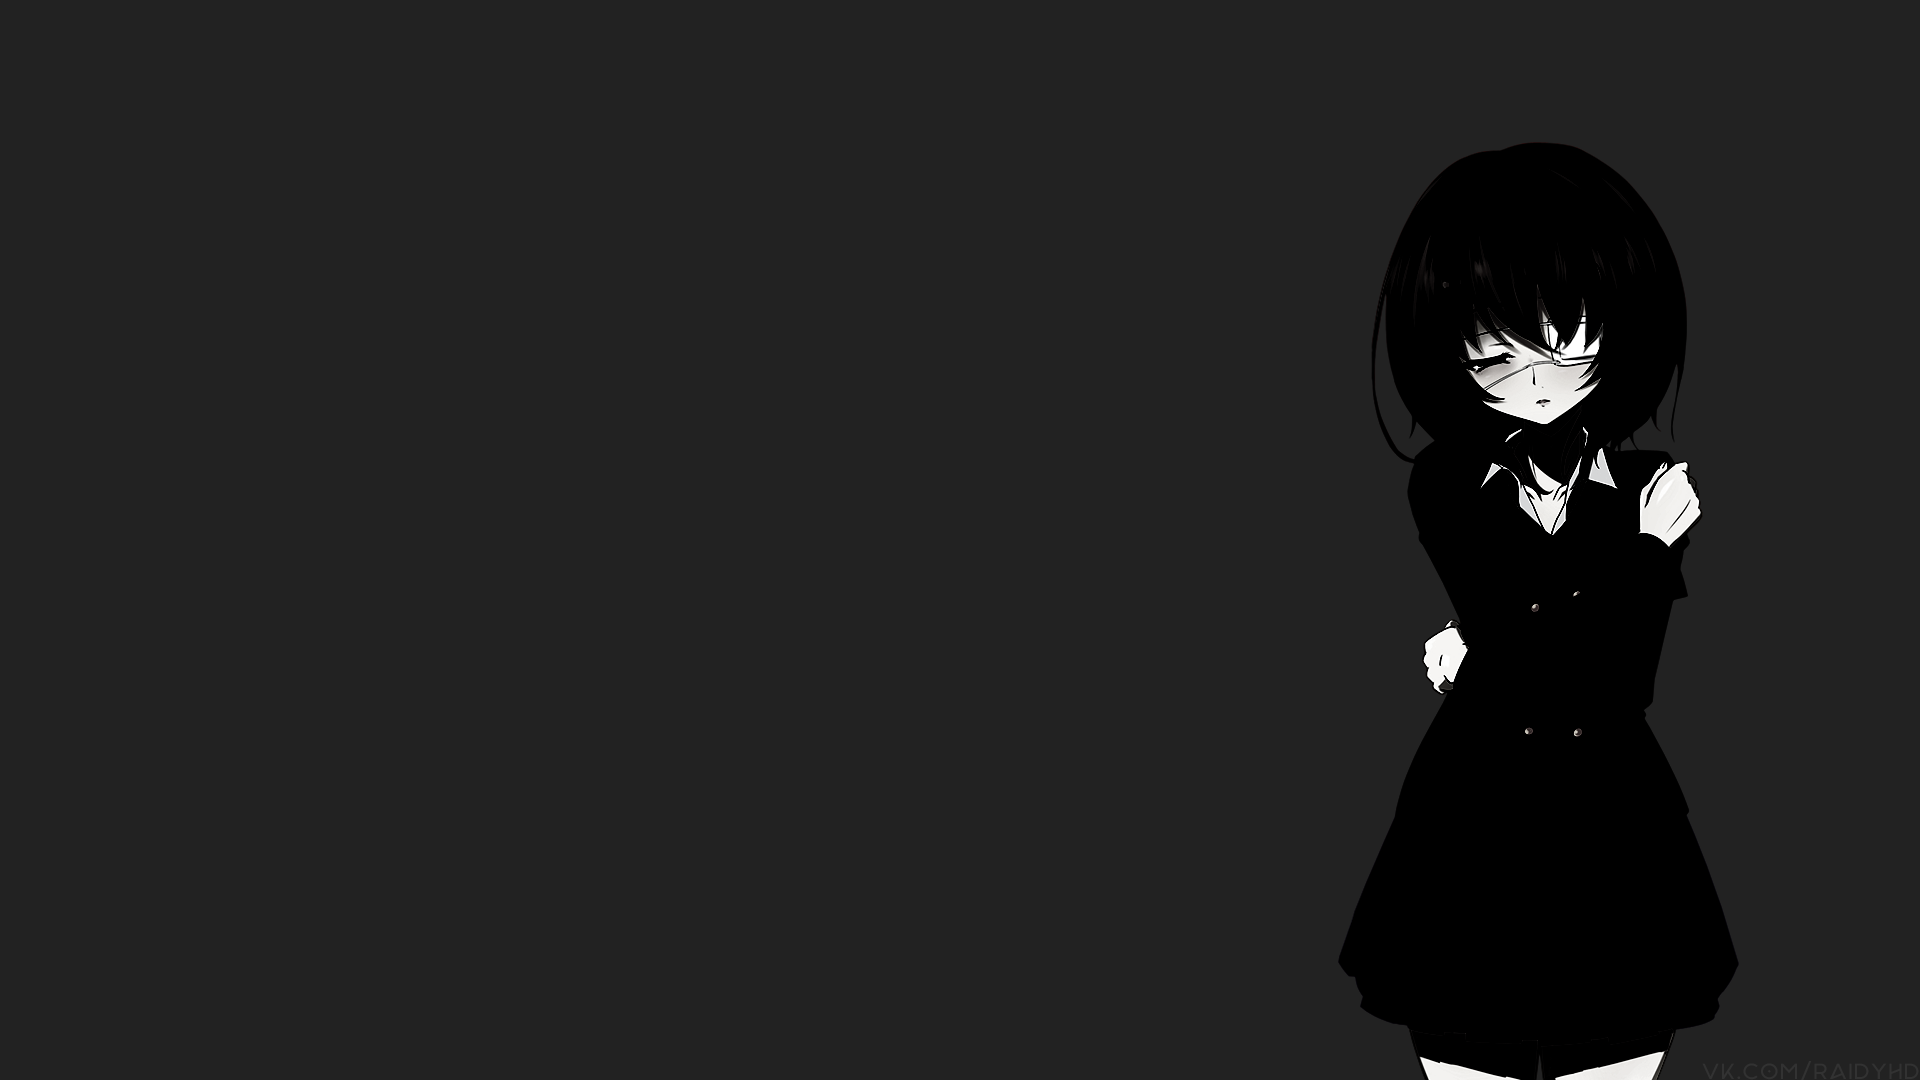 Anime Anime Girls Picture In Picture Misaki Mei Another 1920x1080